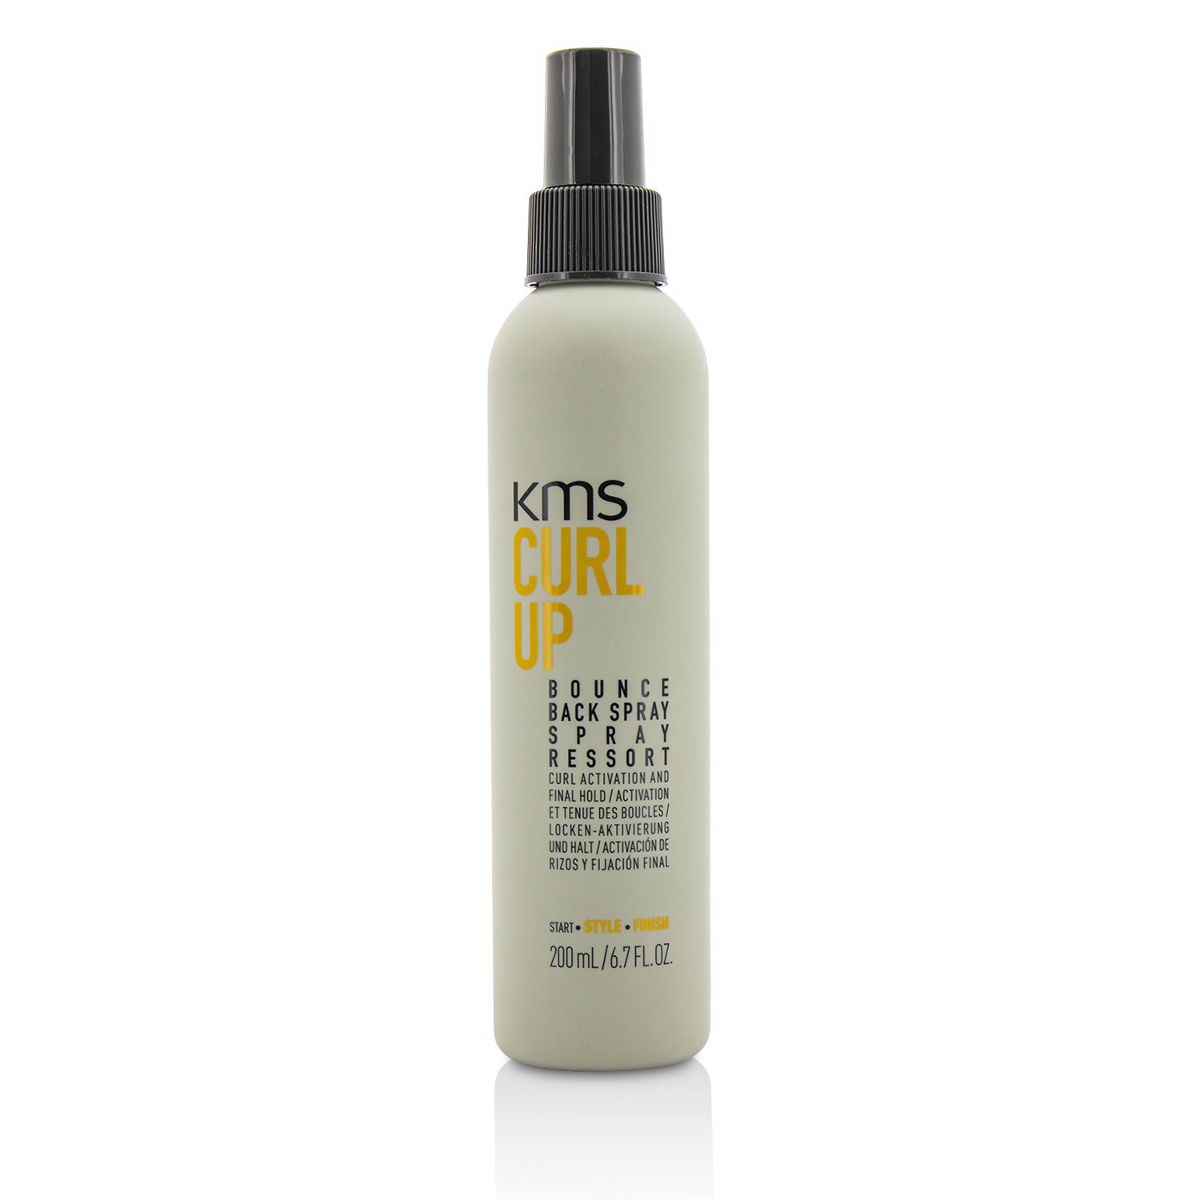 Curl Up Bounce Back Spray (Curl Activation and Final Hold) KMS California Image